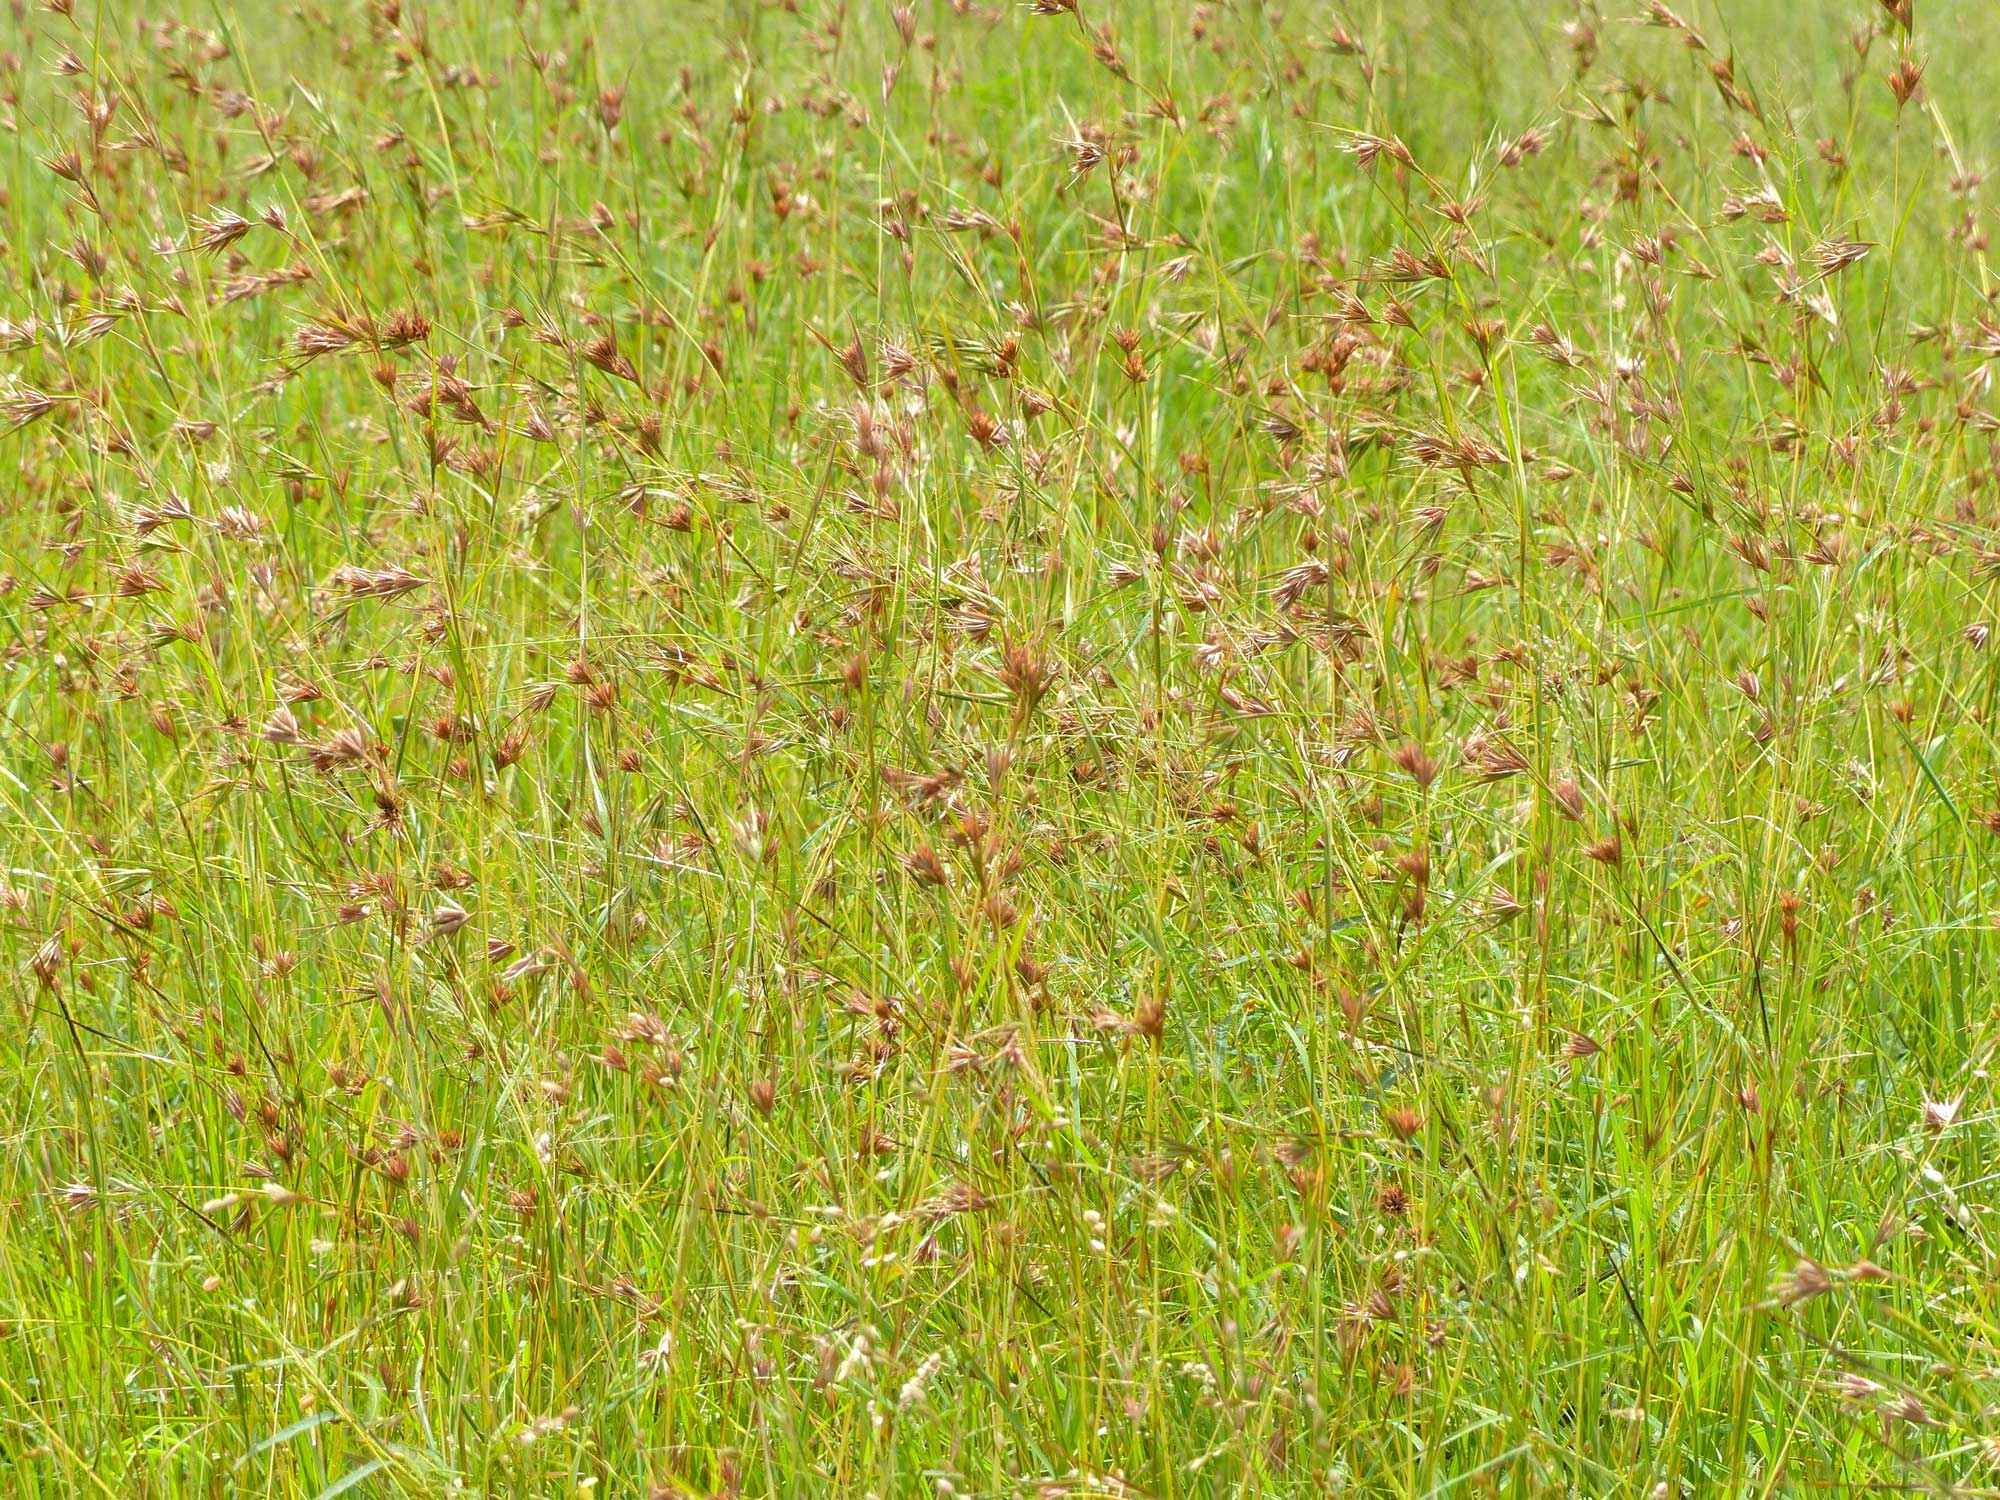 Photograph showing a close view of a field of kangaroo grass or red grass, Kruger National Park, South Africa.